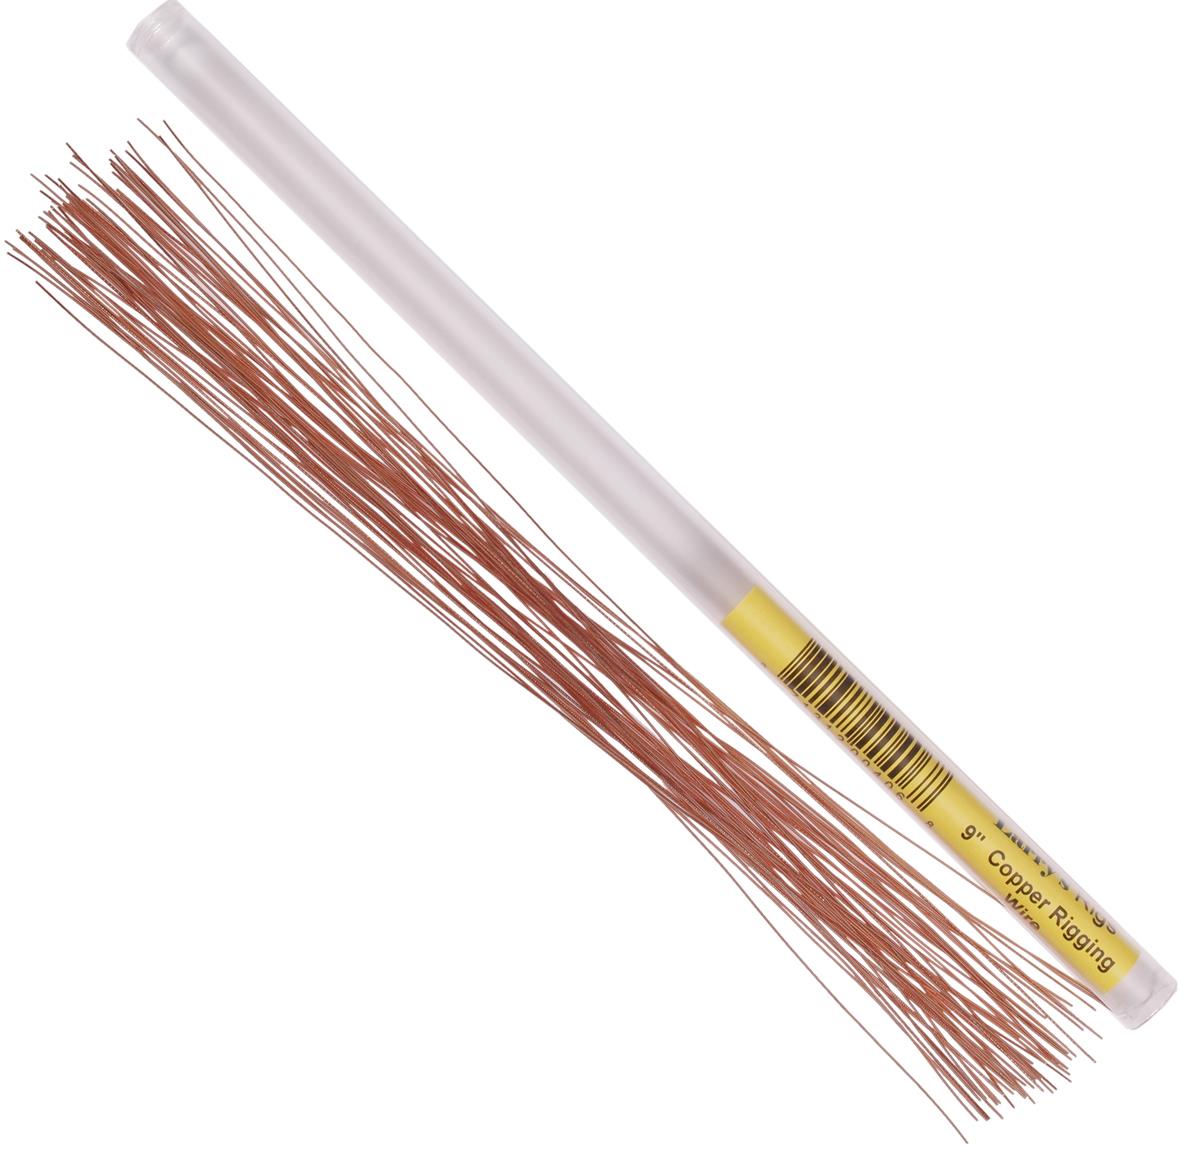 Wellsys Game Fishing - Bait Rigging COPPER WIRE Pkt 50